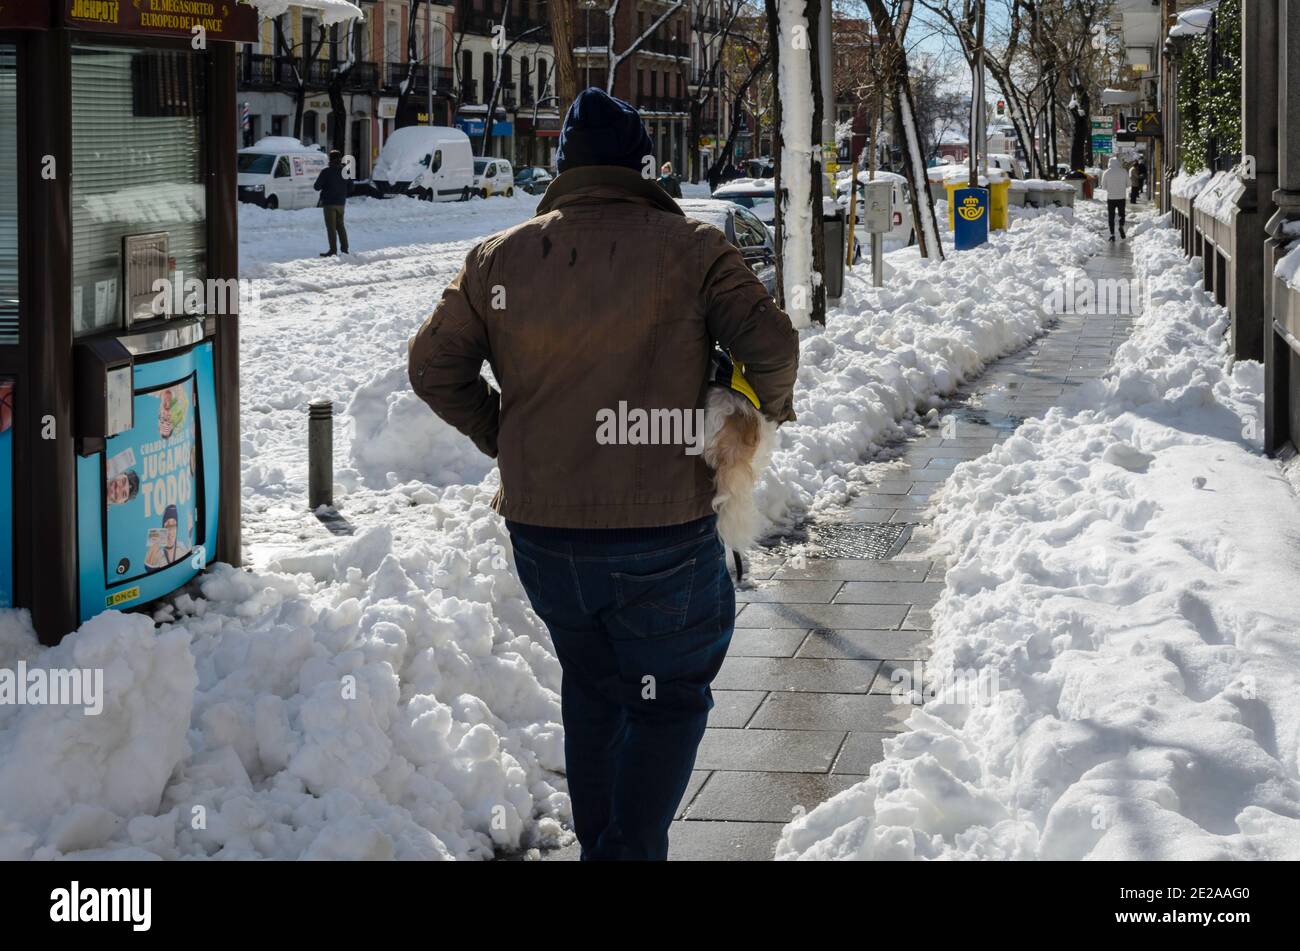 Madrid, Spain. 10 th January 2021. View of a man with dog in San Bernardo street, Chamberi quarter, after the snow storm. Credit: Enrique Davó. Stock Photo